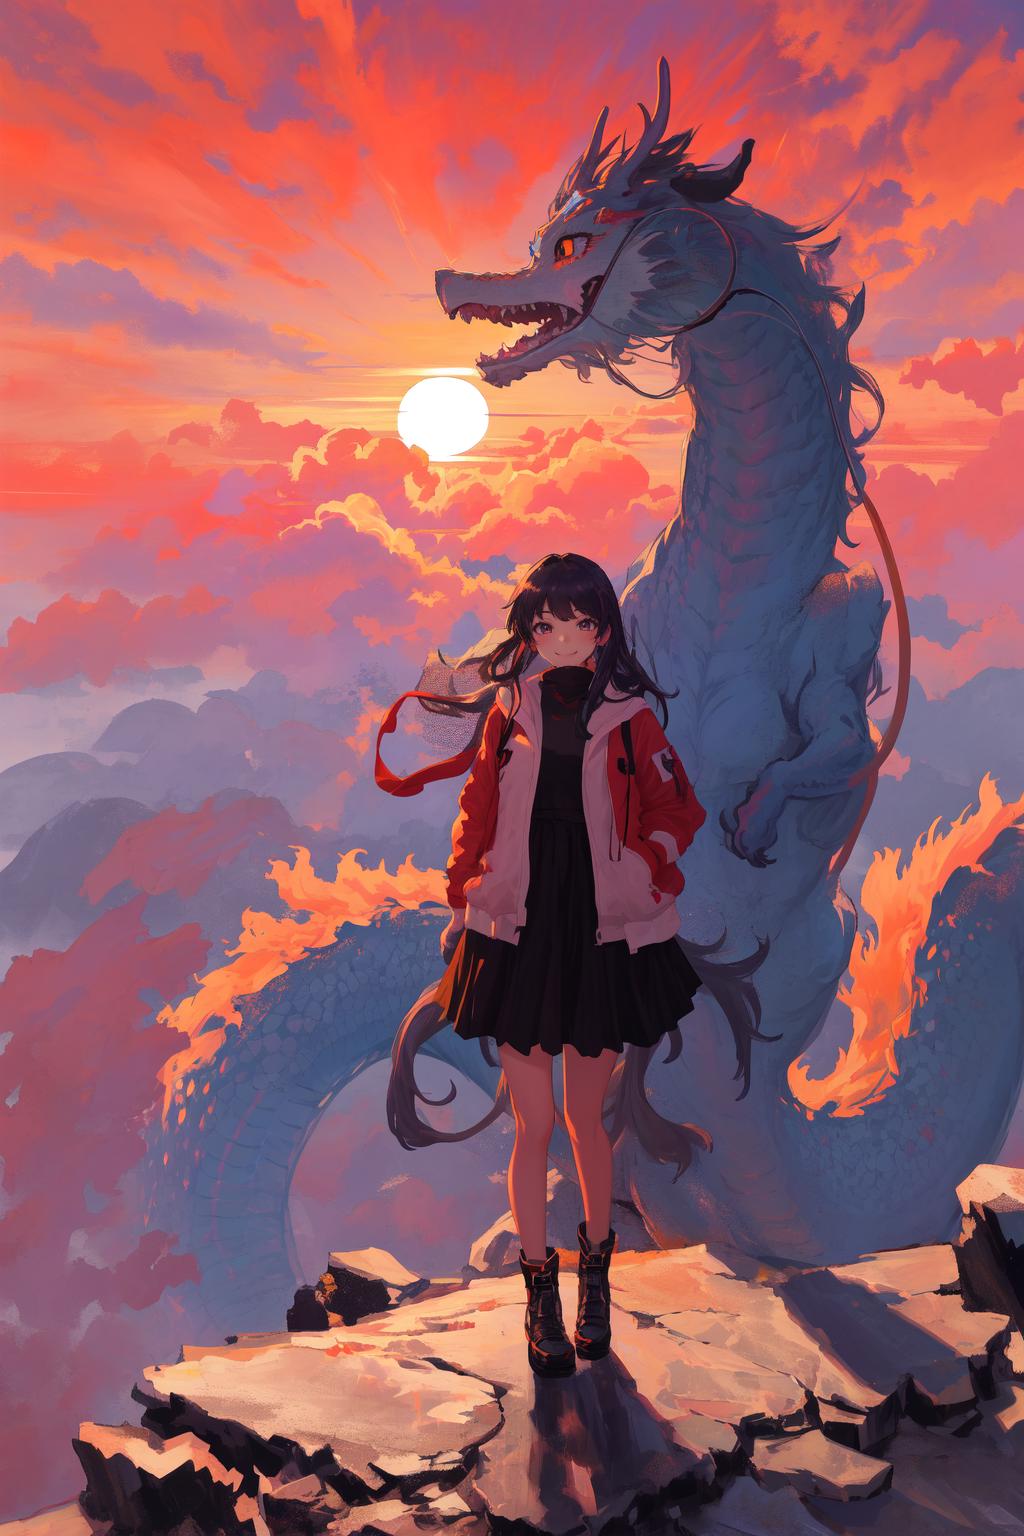 A girl standing on a cliff next to a large dragon.